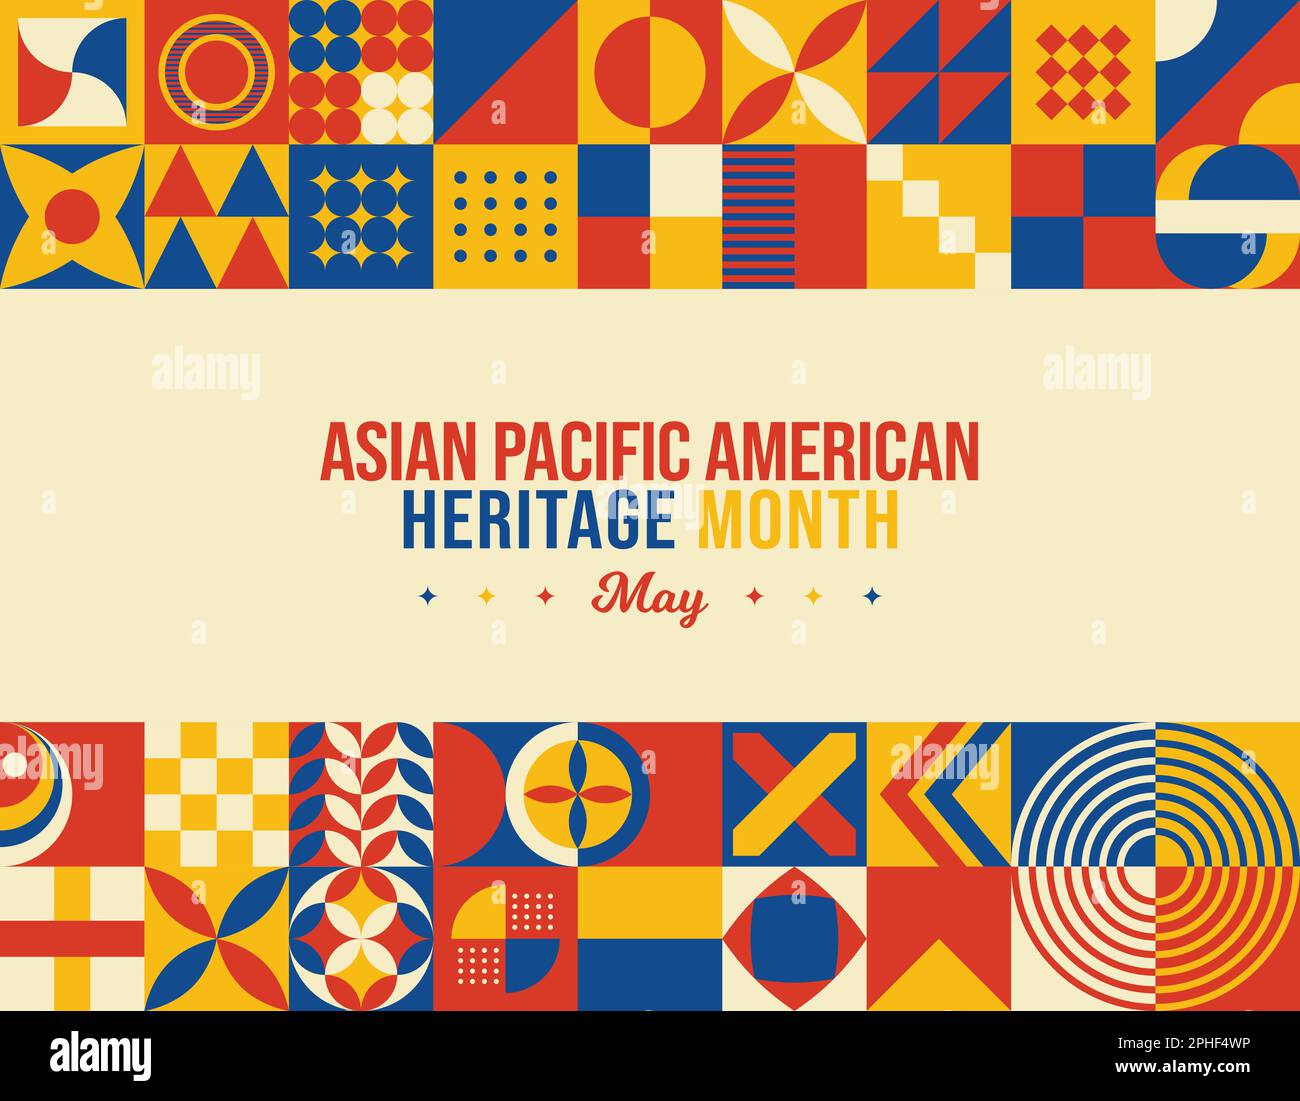 Asian American and Pacific Islander Heritage Month Vector Illustration. May Awareness and Celebration. Neo Geometric pattern abstract graphic design. Stock Vector